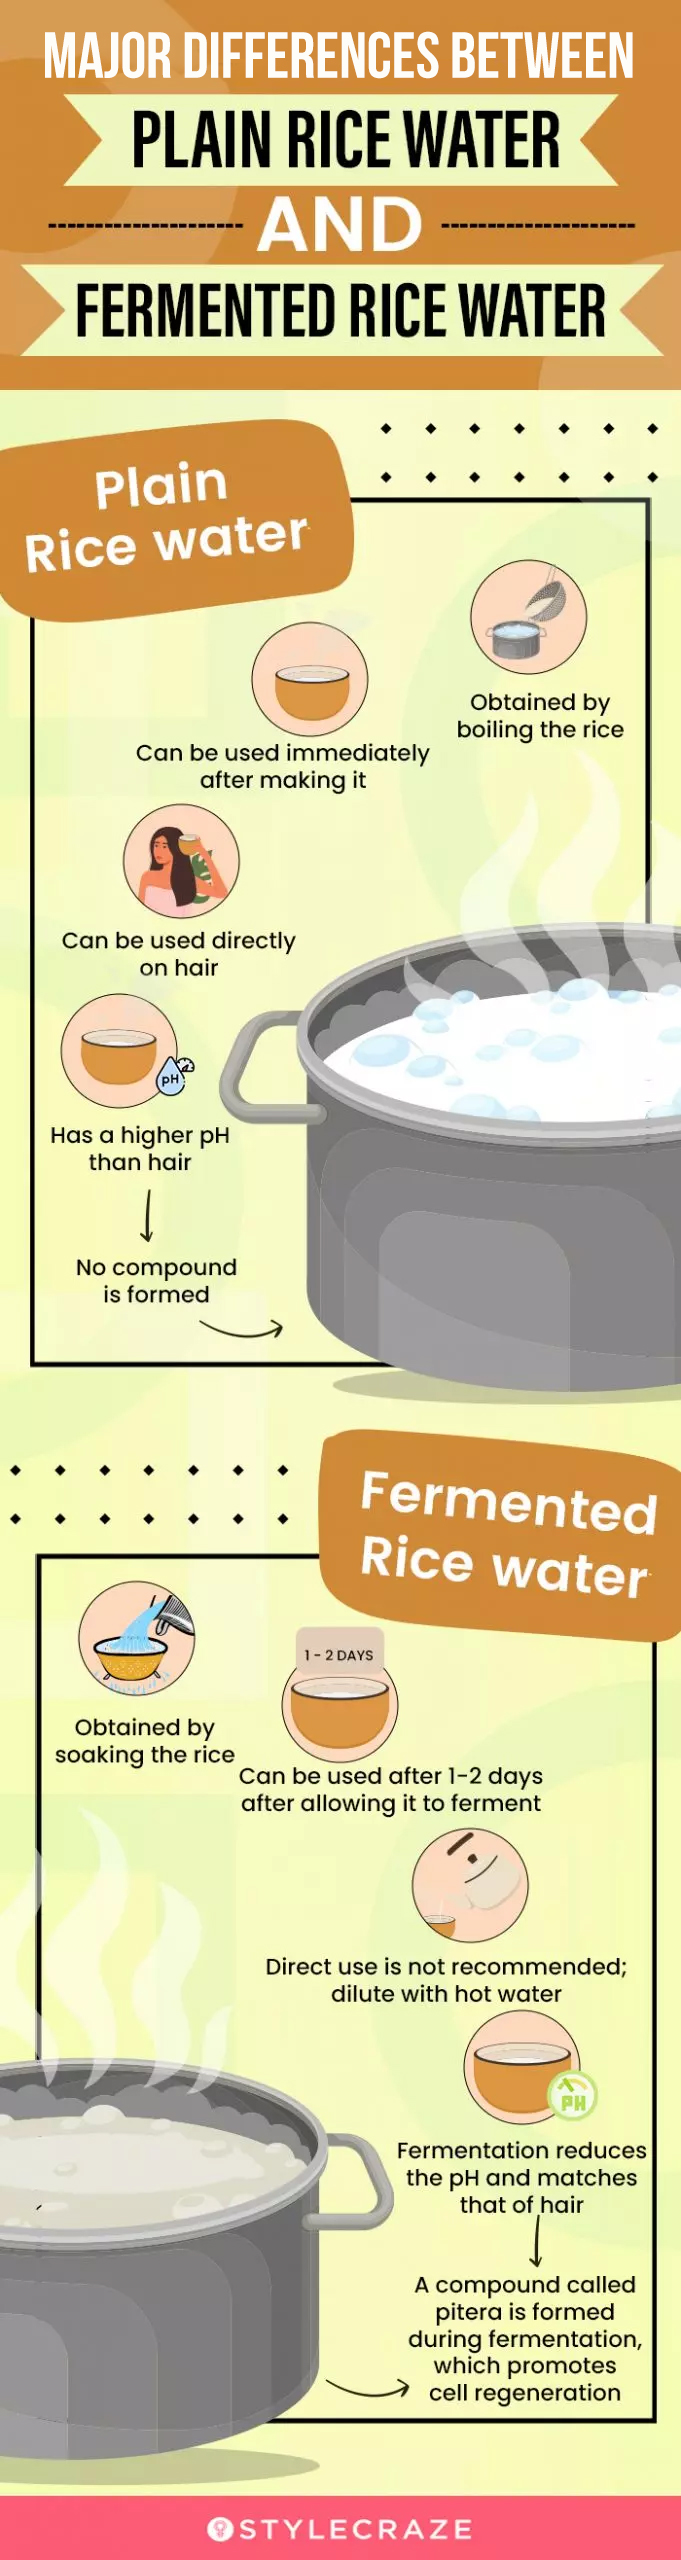 main difference between plain rice water and fermented rice water (infographic)